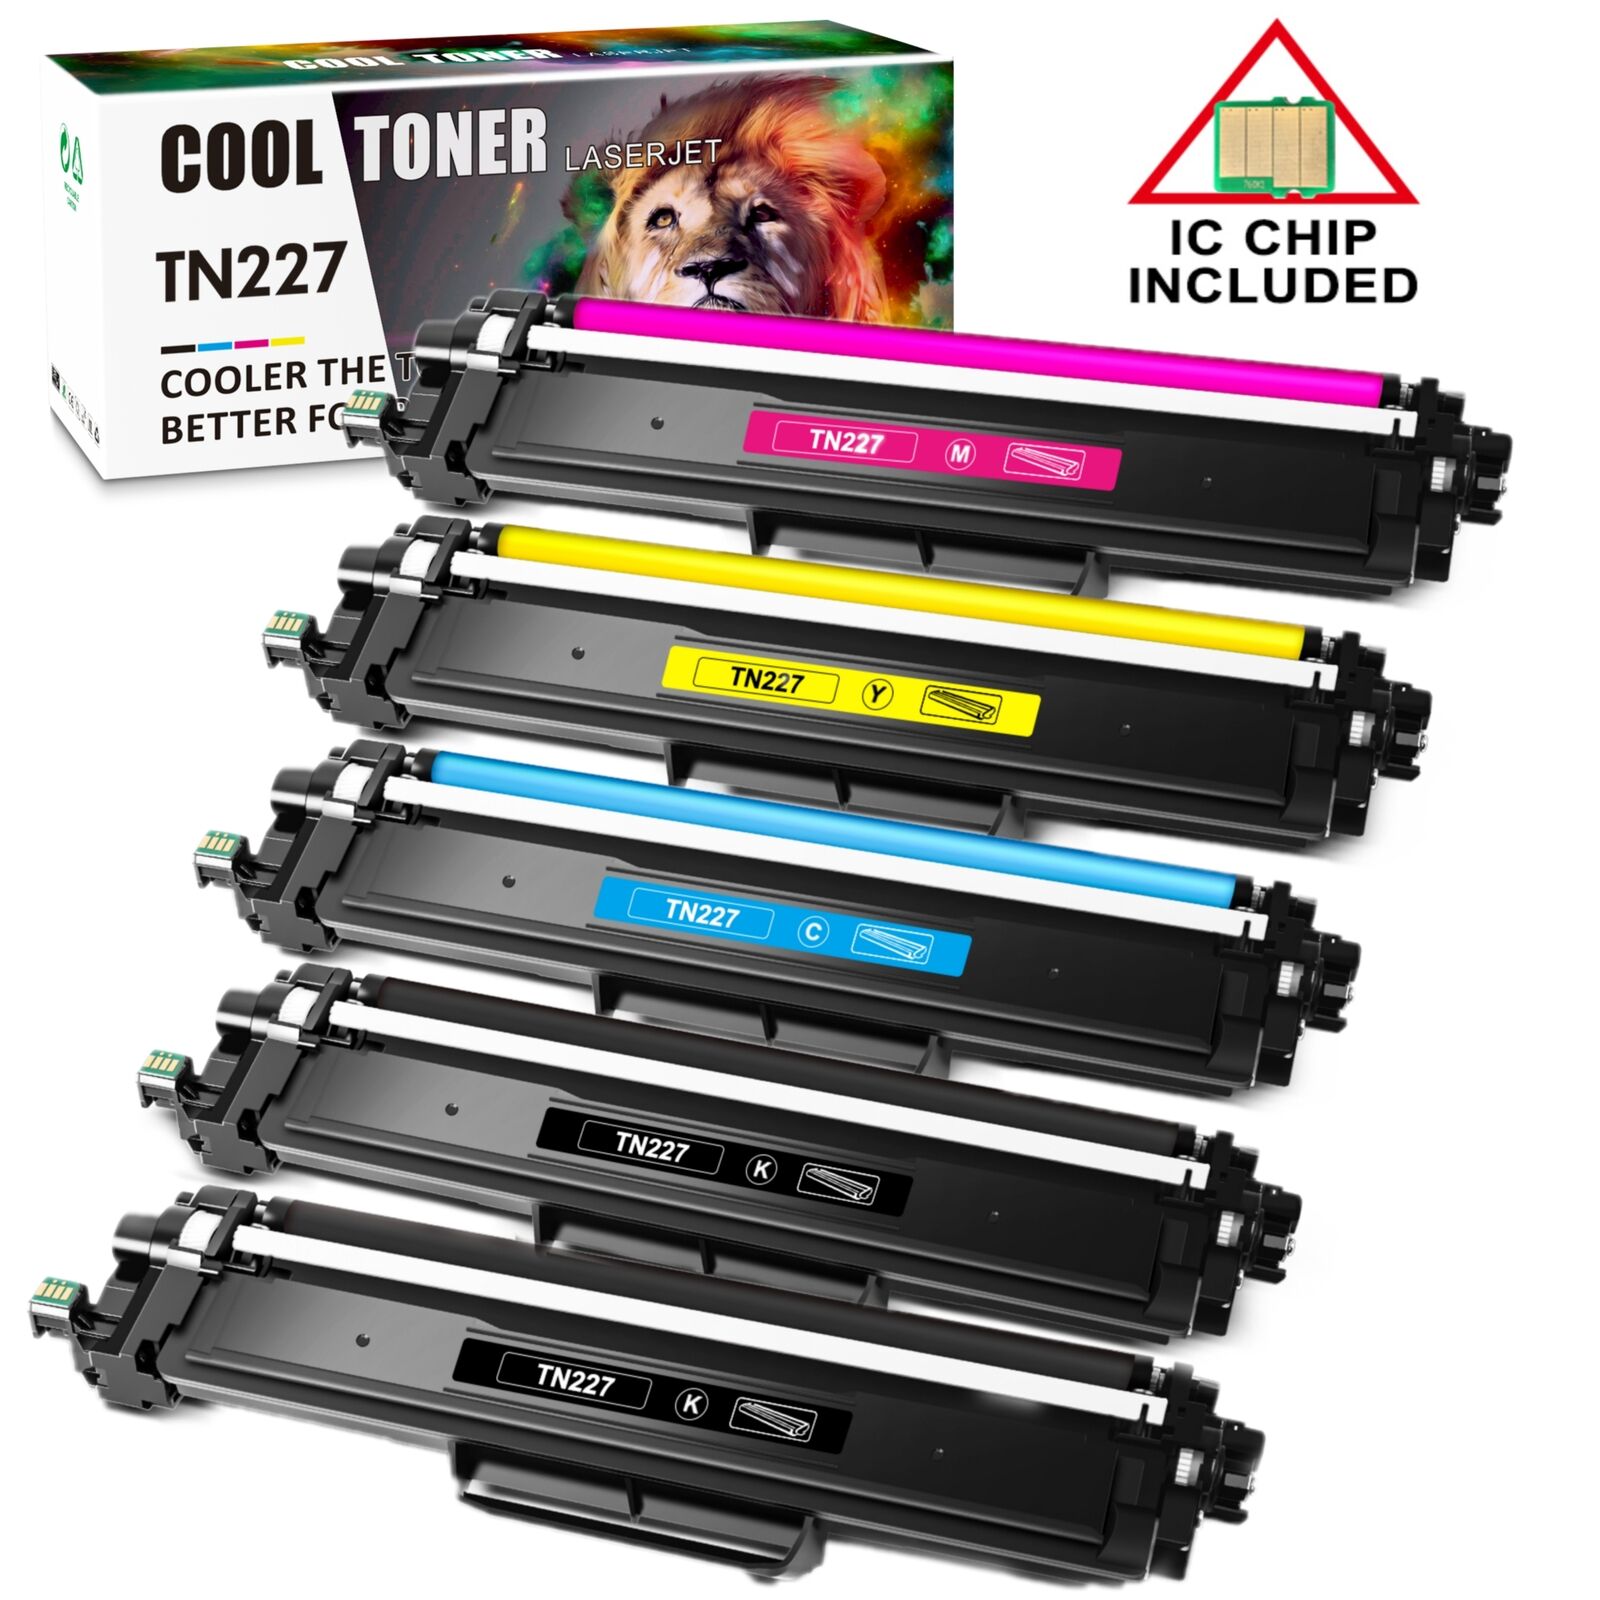 5x TN227 TN223 Toner Cartridge replacement for Brother HL-L3210CW HL-L3230CDW